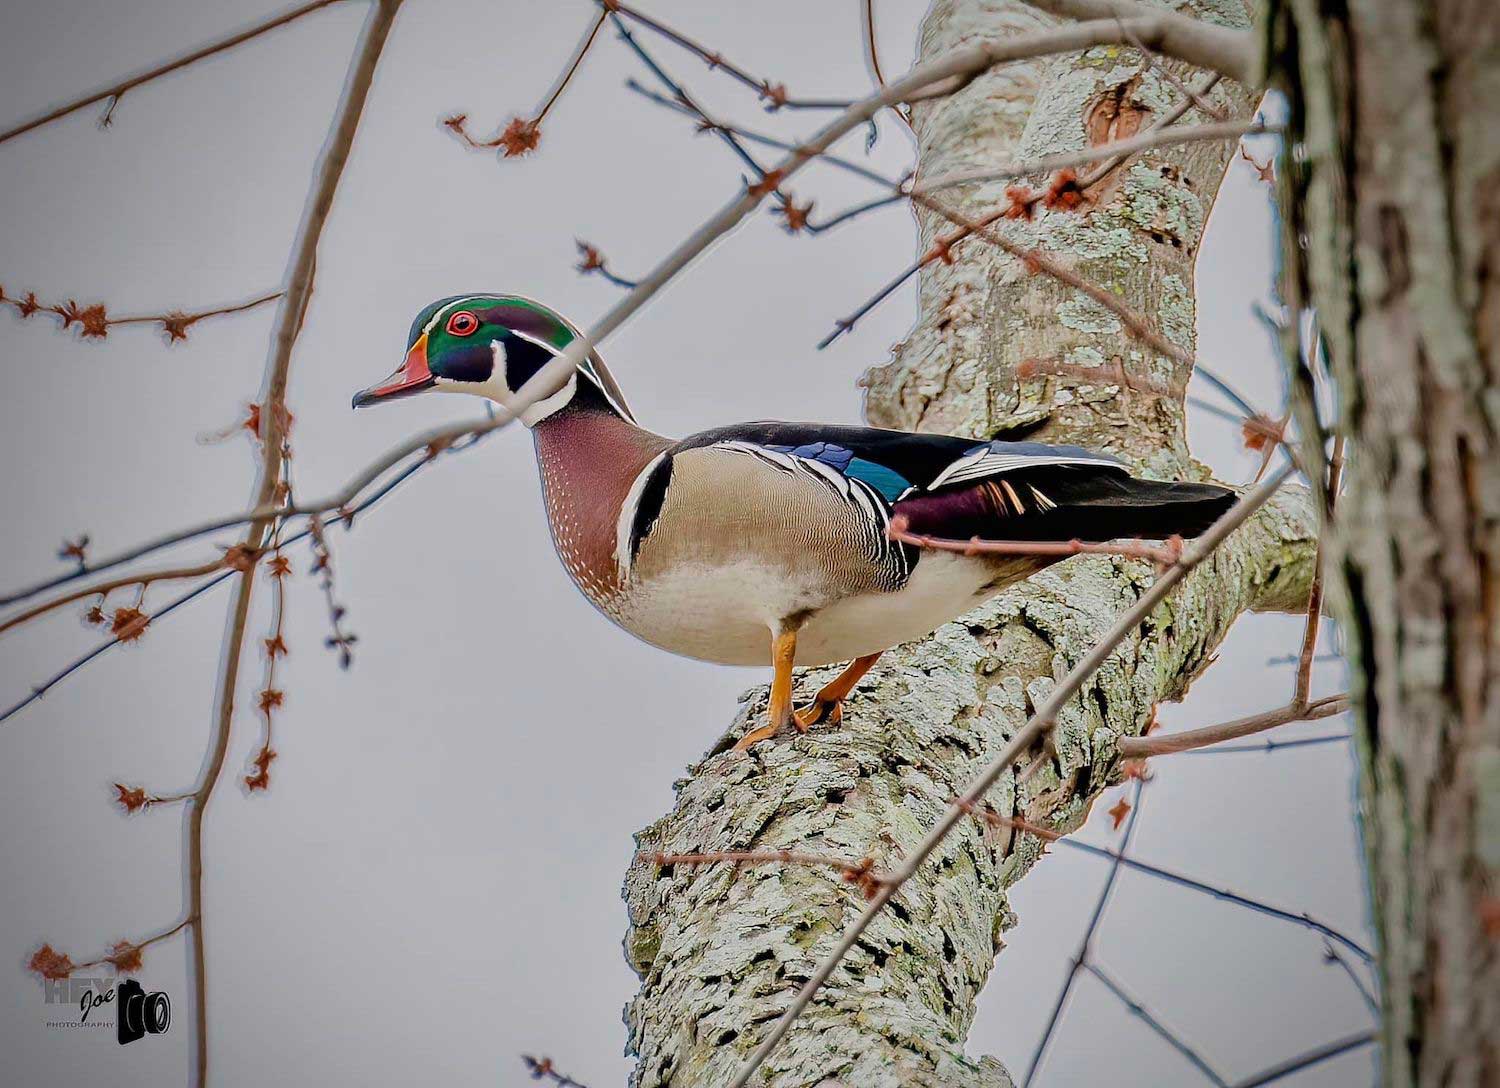 A male wood duck standing on a tree branch.